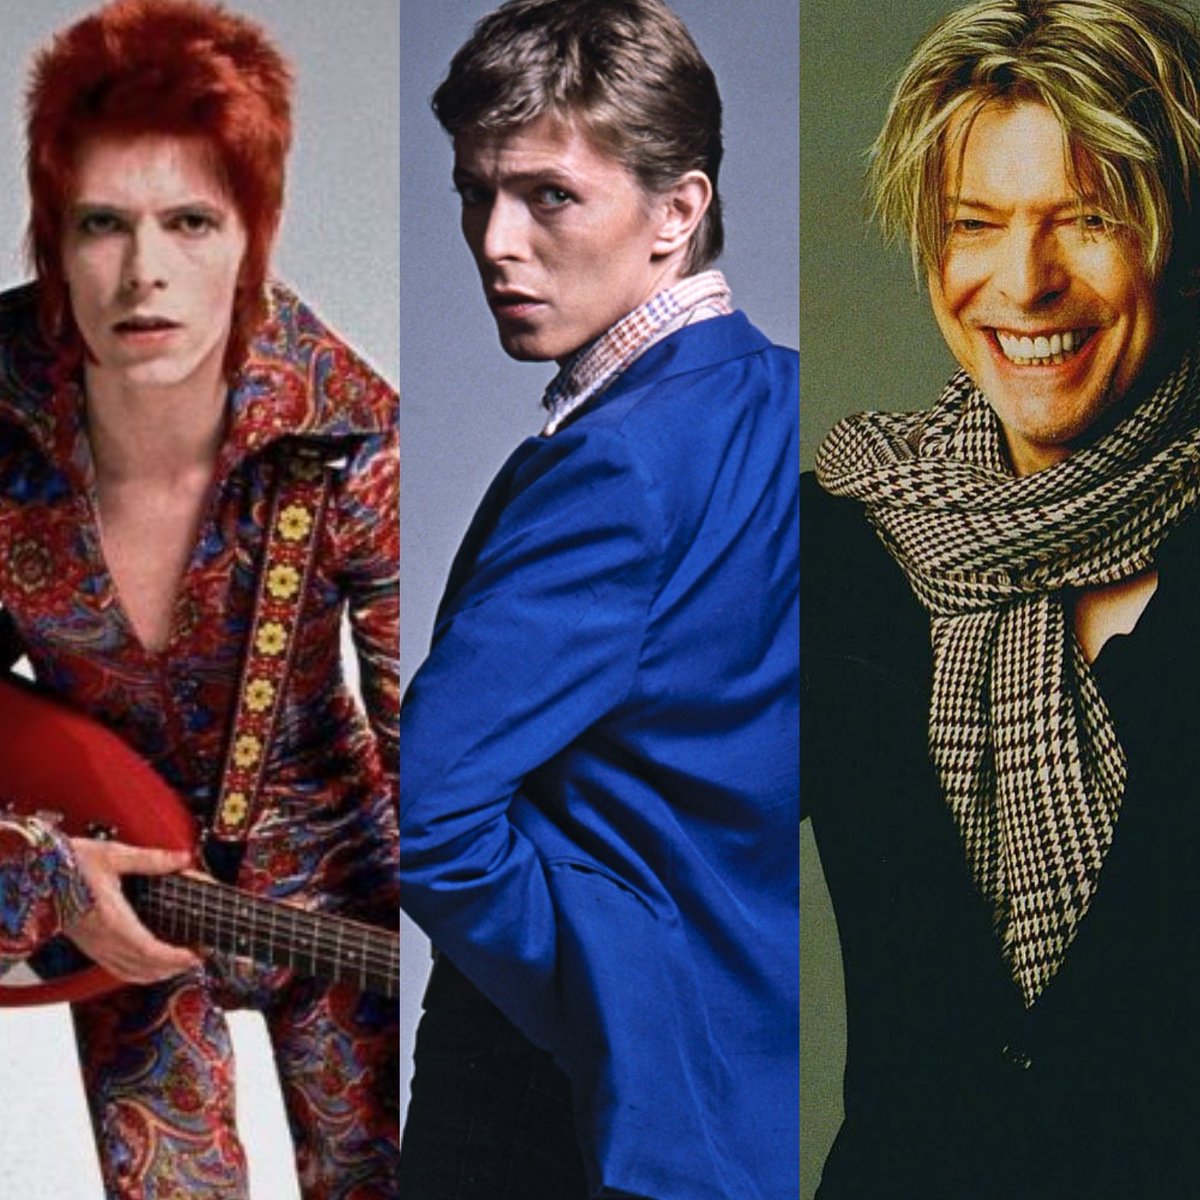 remembering the one and only Mr #DavidBowie born on this date in 1947. What are your absolute favourite #Bowie tracks..?